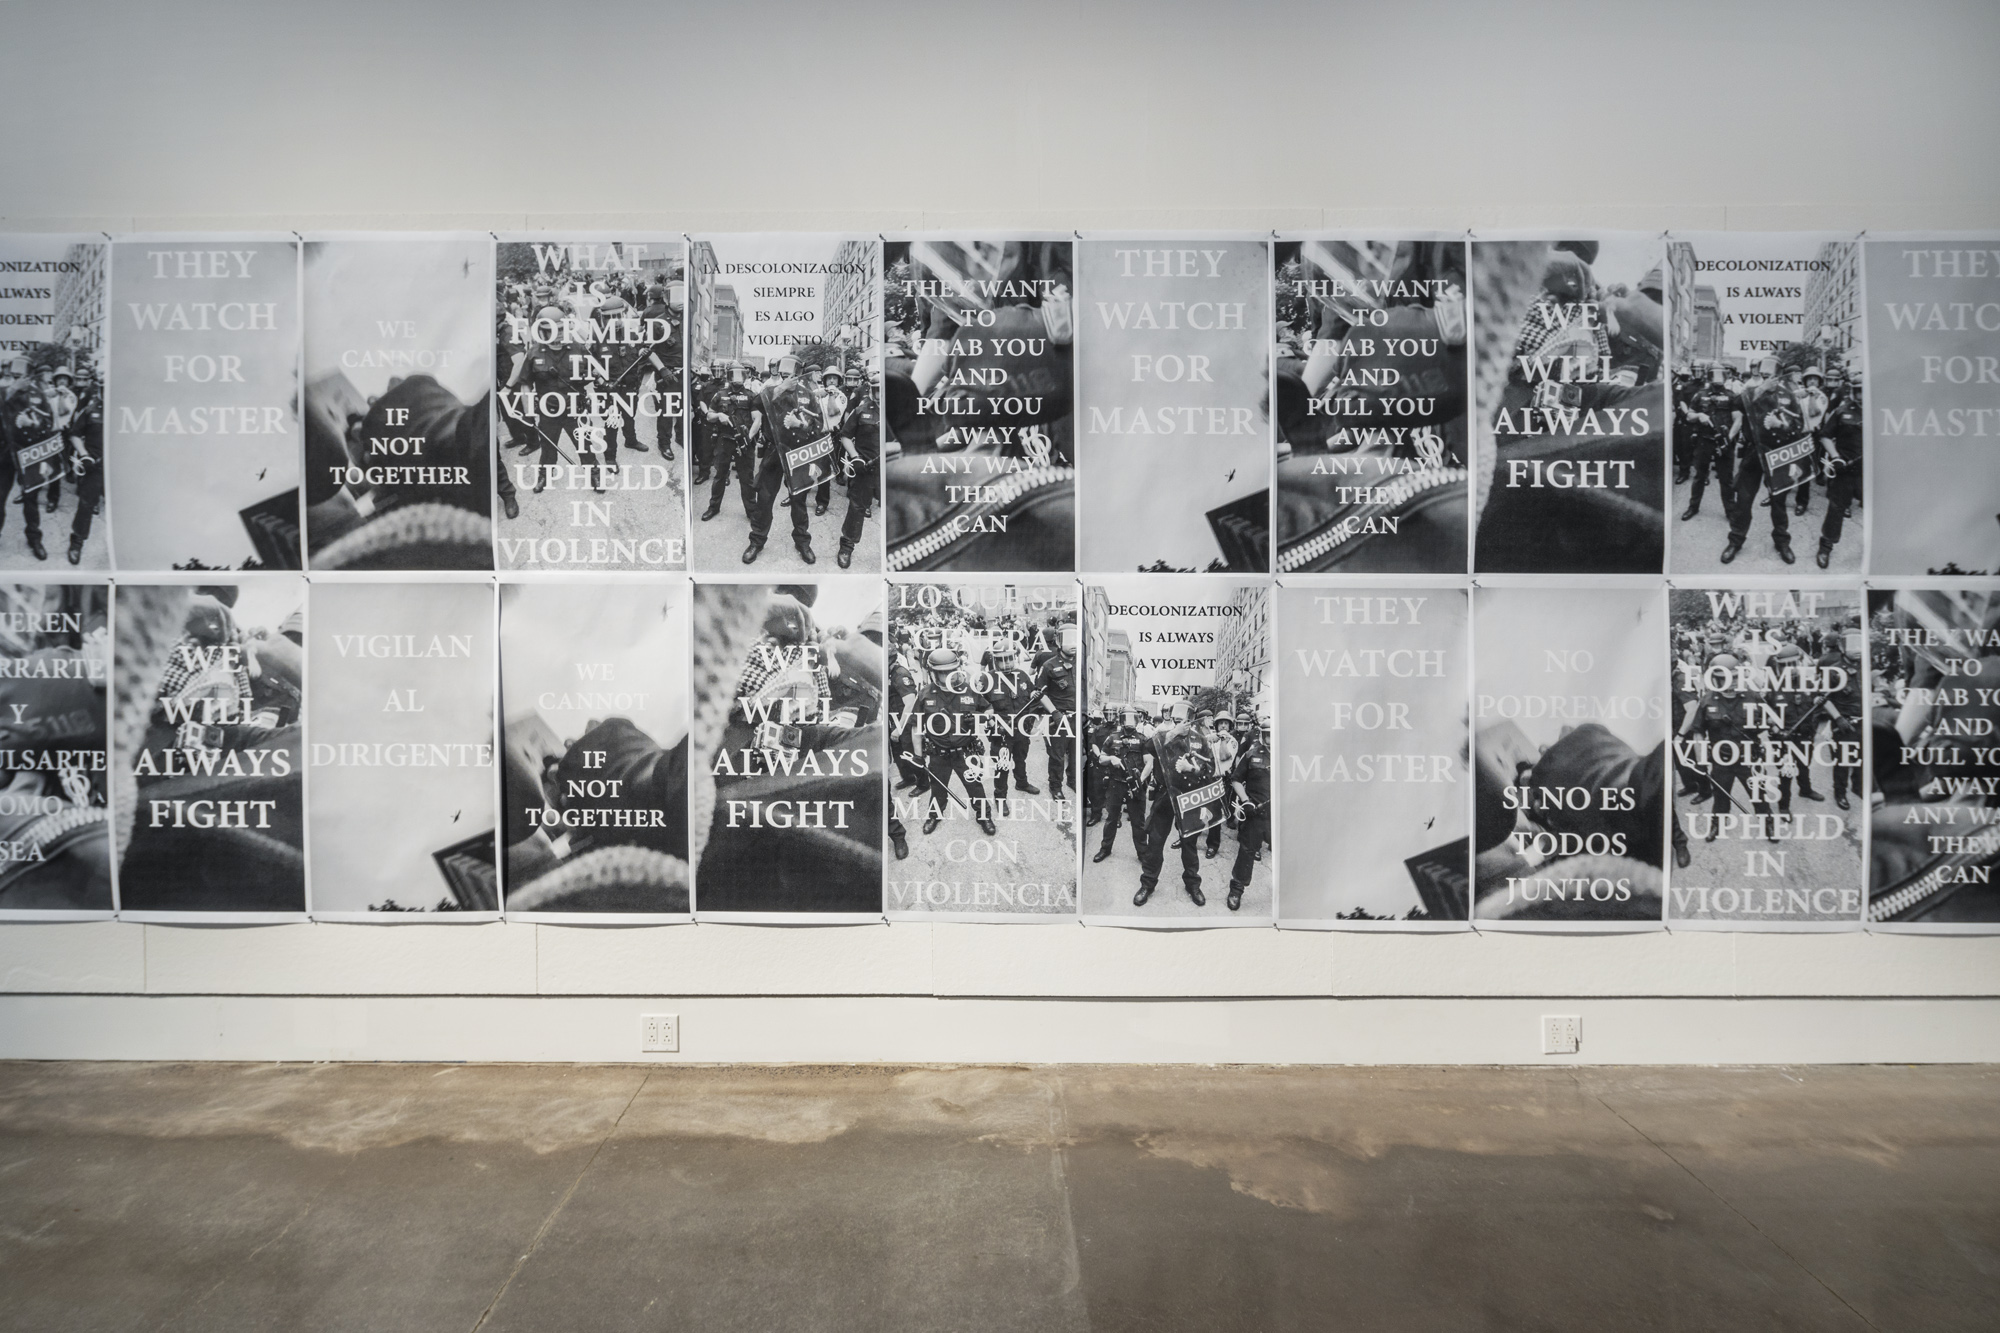 Two rows of twenty-one large posters of photographs in black and white, with protest slogans in black and white text in both English and Spanish.